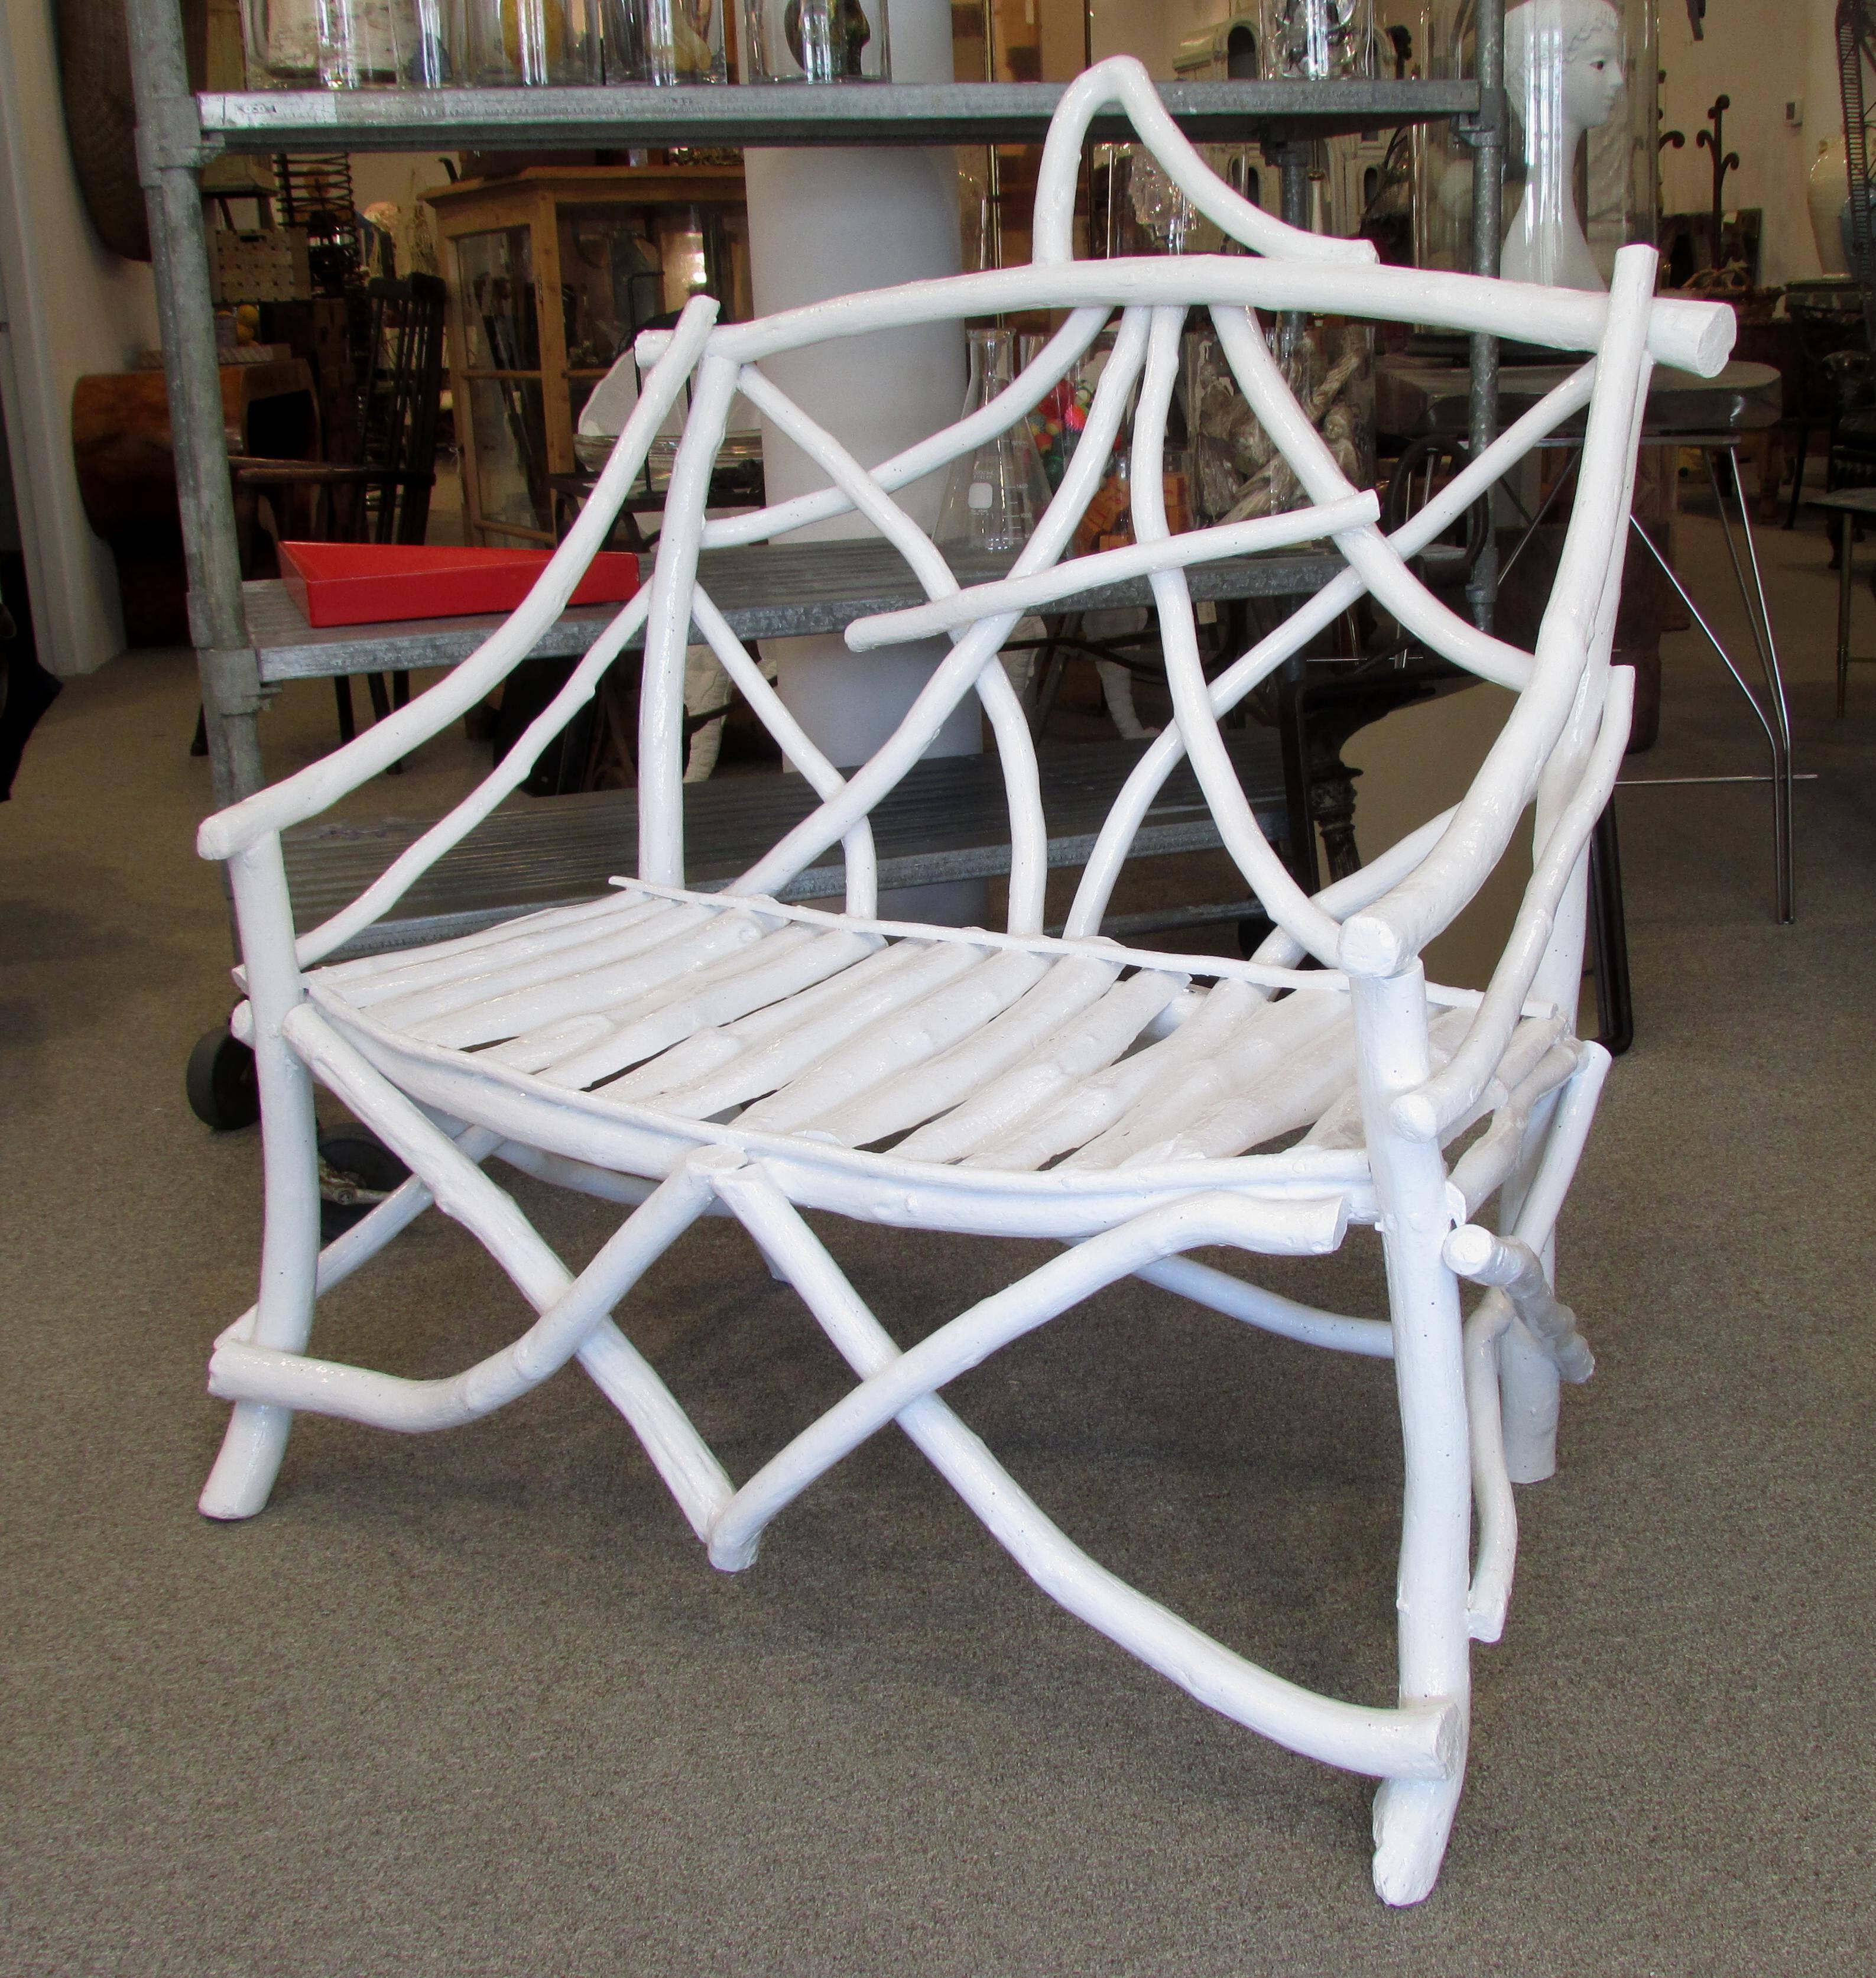 Rustic Folk Art made white painted bench made from twigs and found wood very graphic with a high gloss painted surface.